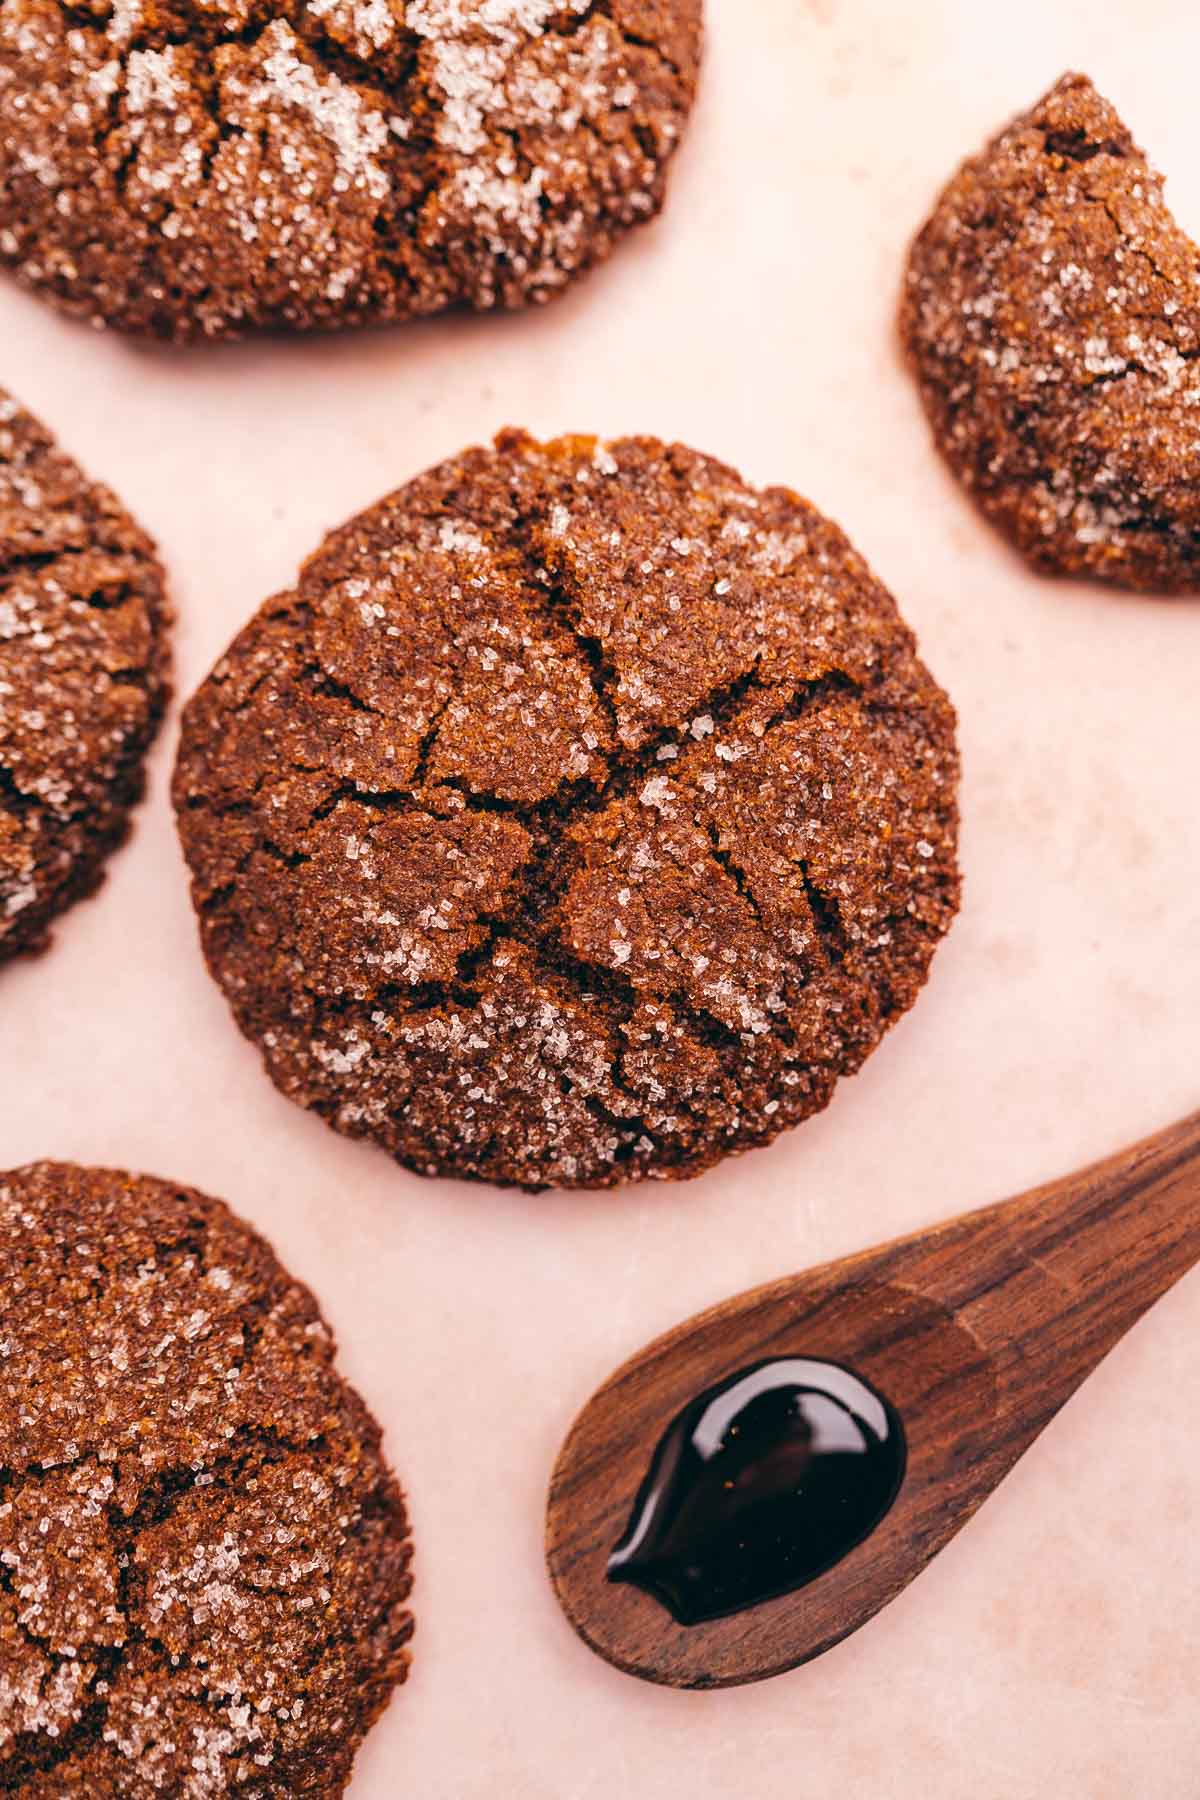 Gluten-free gingerbread cookies with molasses on a pink background.